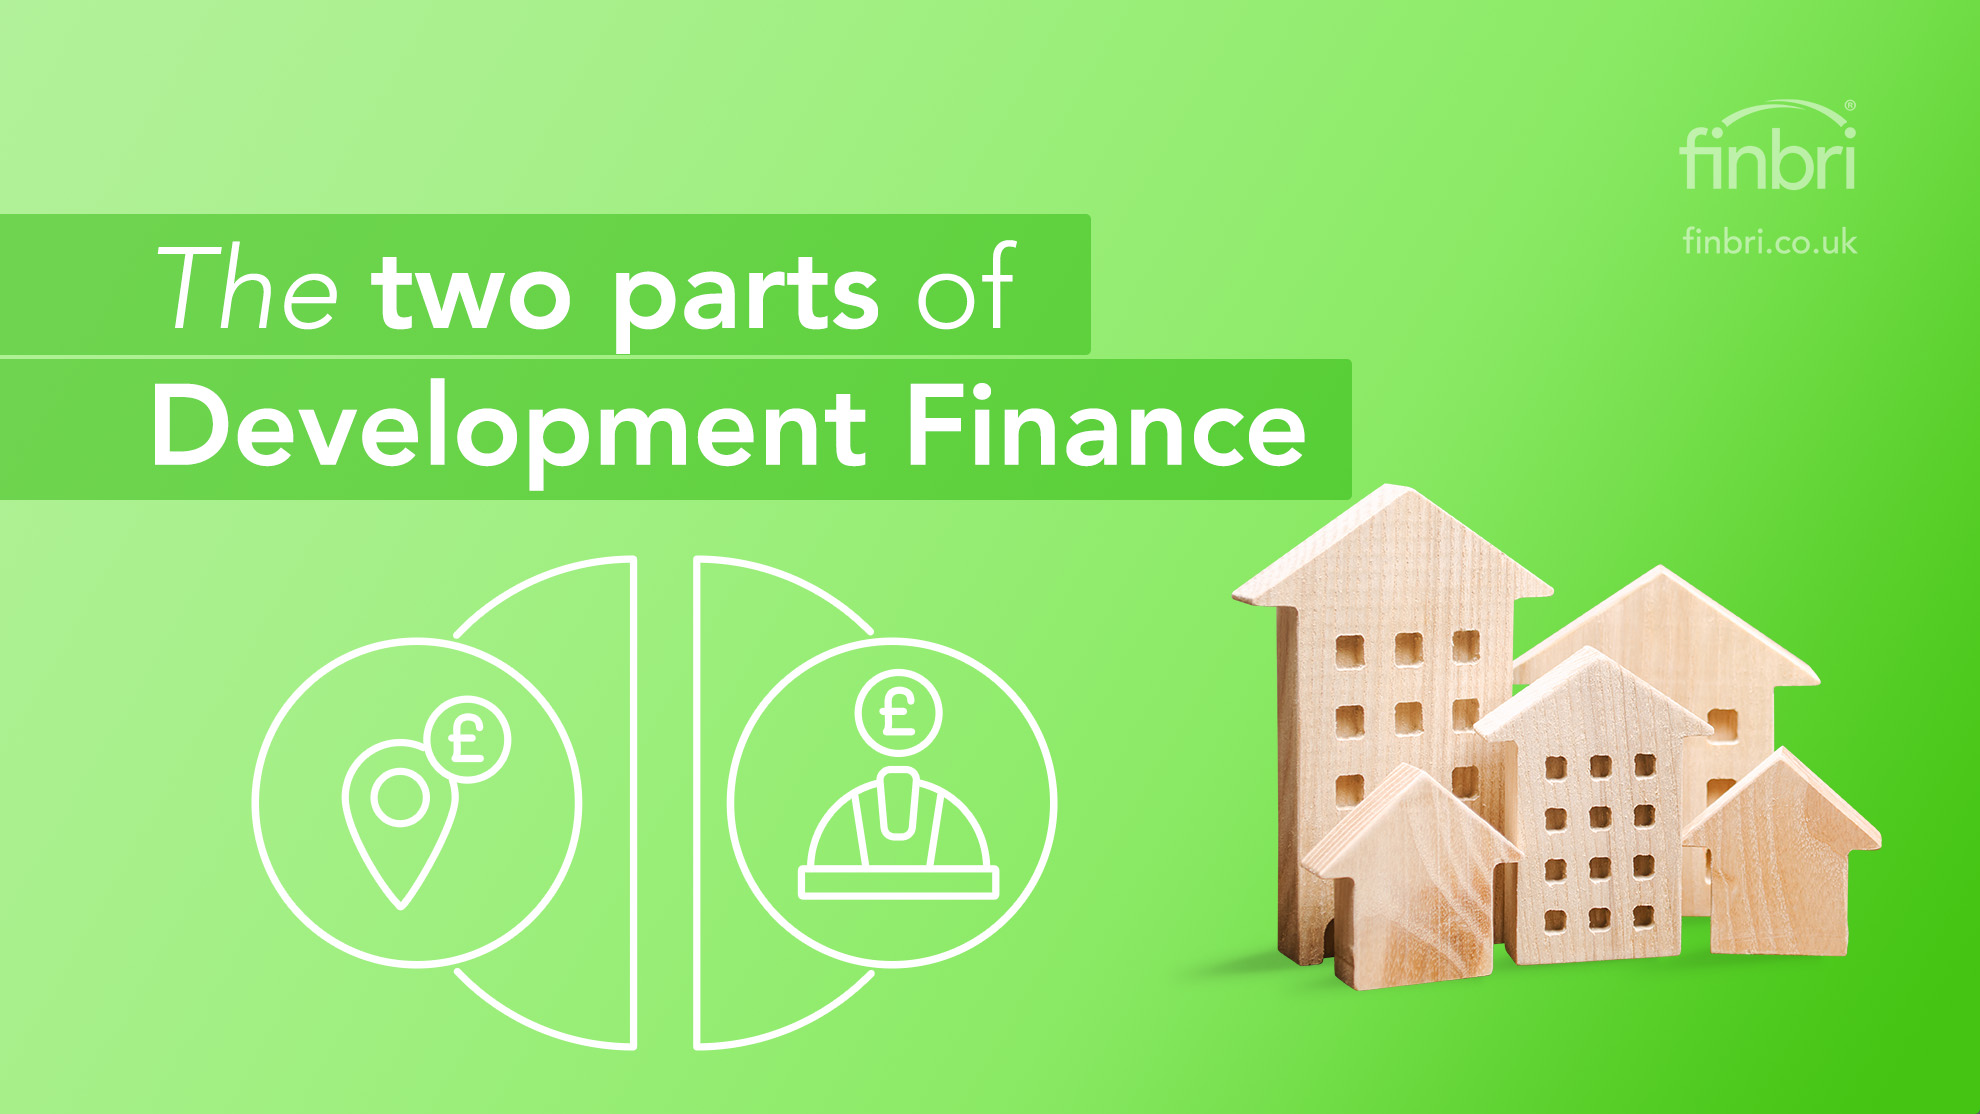 The two parts to Development Finance